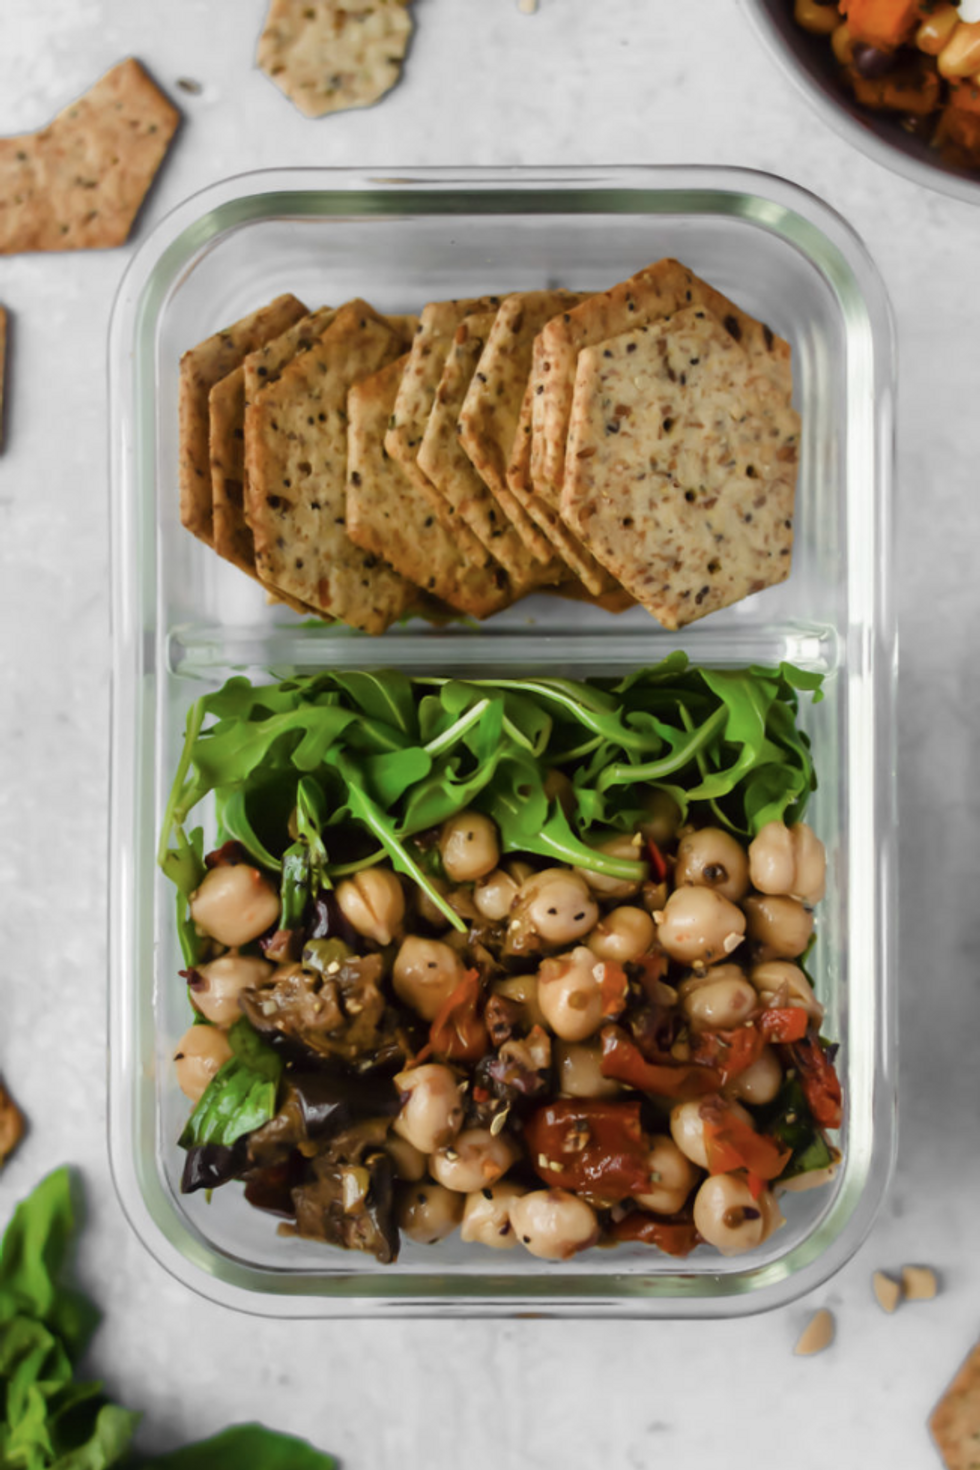 10 Adult Lunchables That Will Spice Up Your Work Lunch - PowerToFly